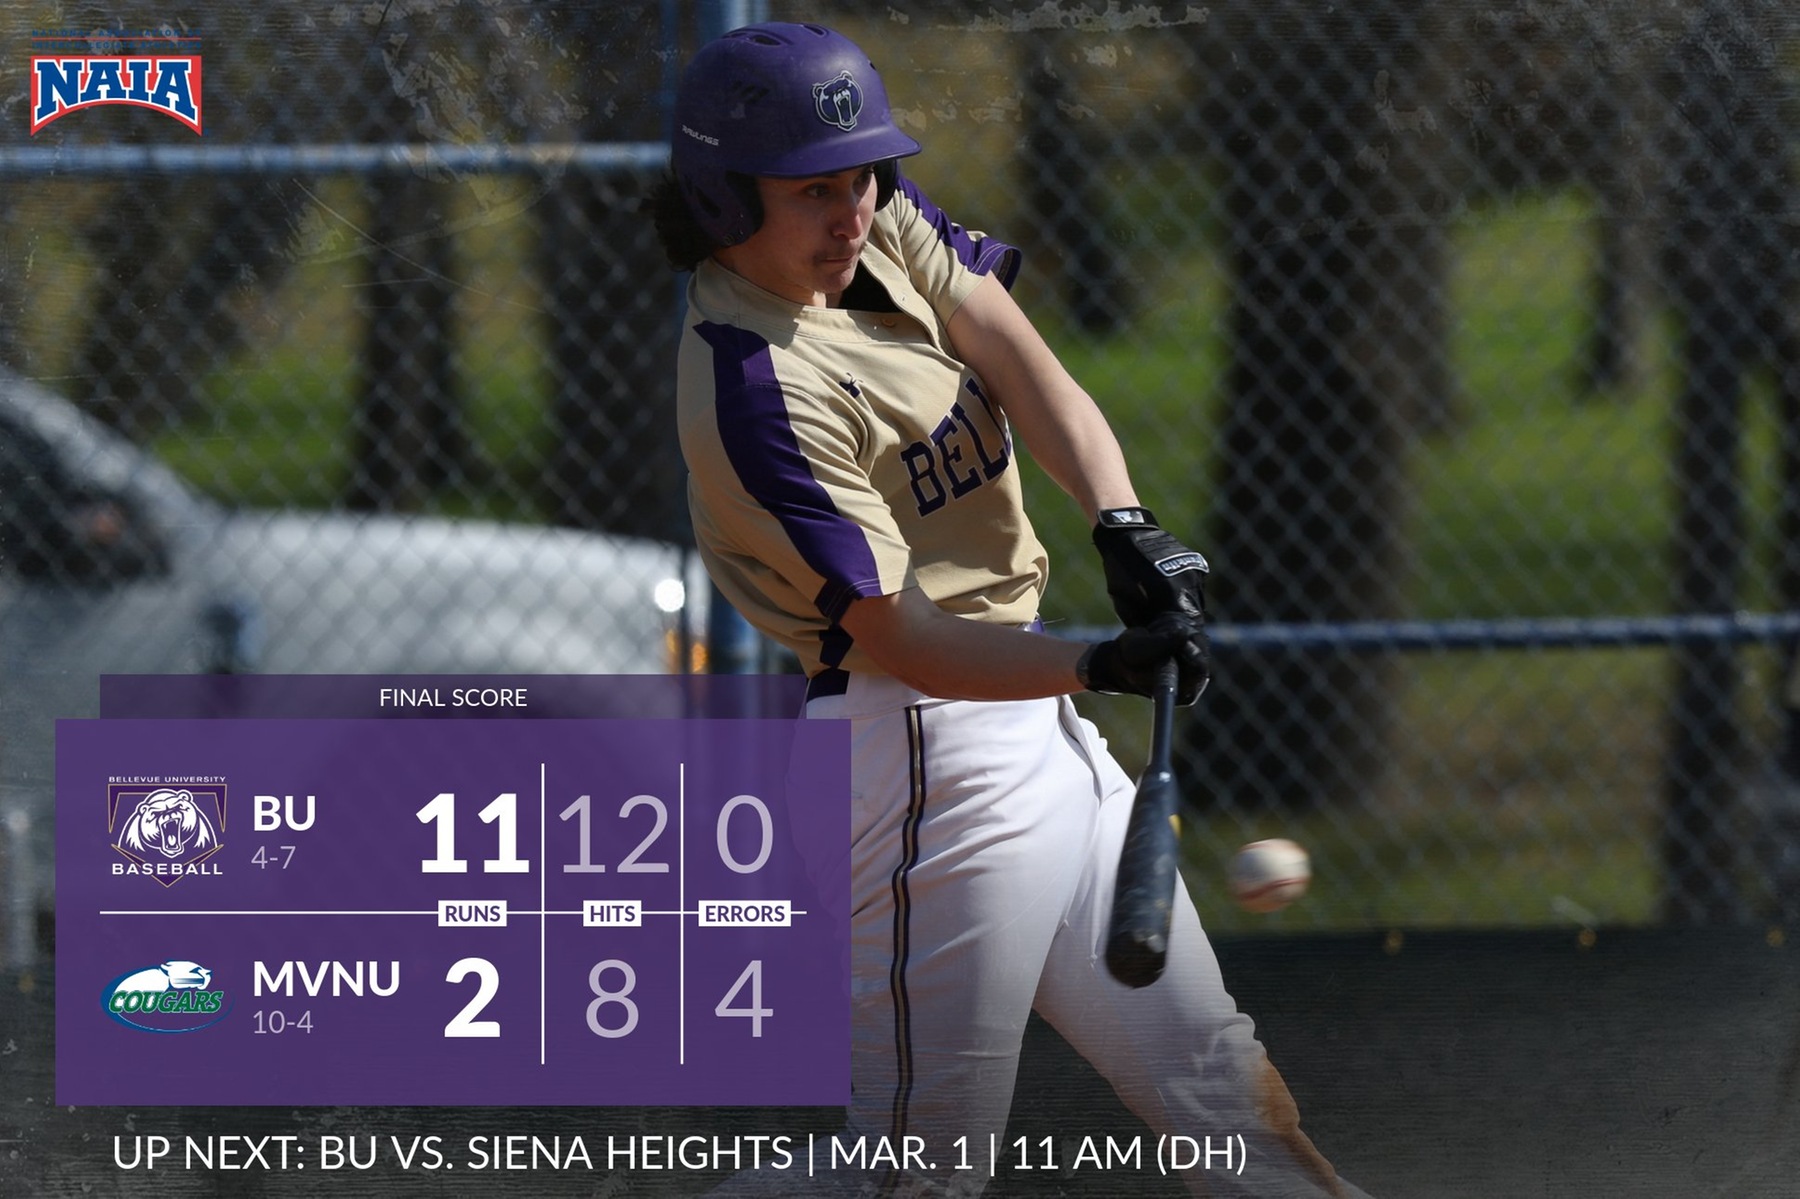 BU snaps losing skid with 11-2 win over MVNU